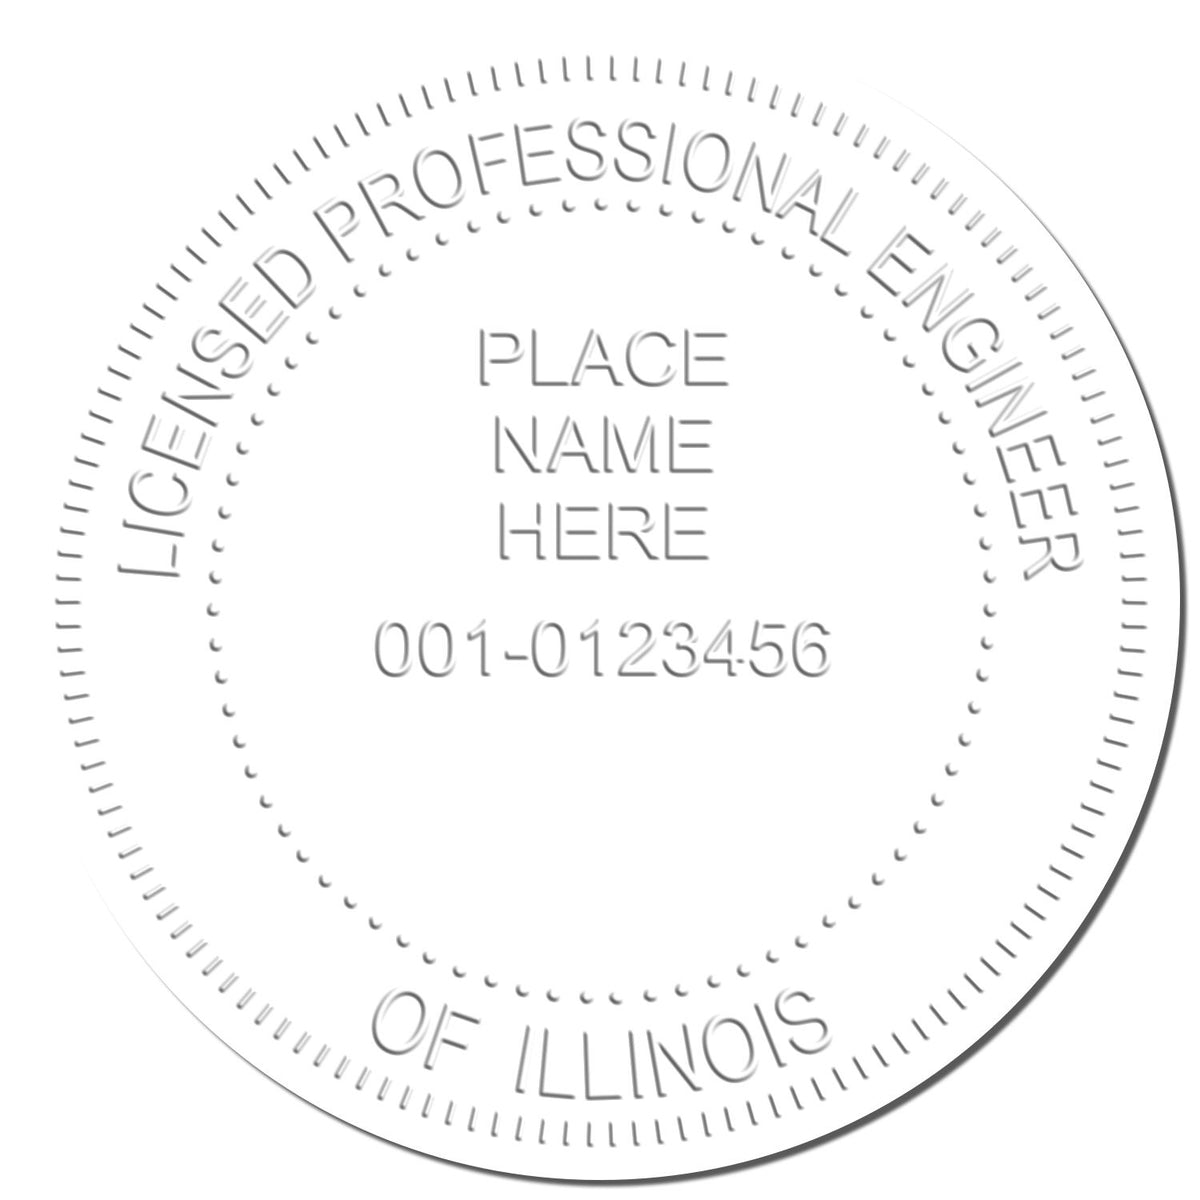 The Soft Illinois Professional Engineer Seal stamp impression comes to life with a crisp, detailed photo on paper - showcasing true professional quality.